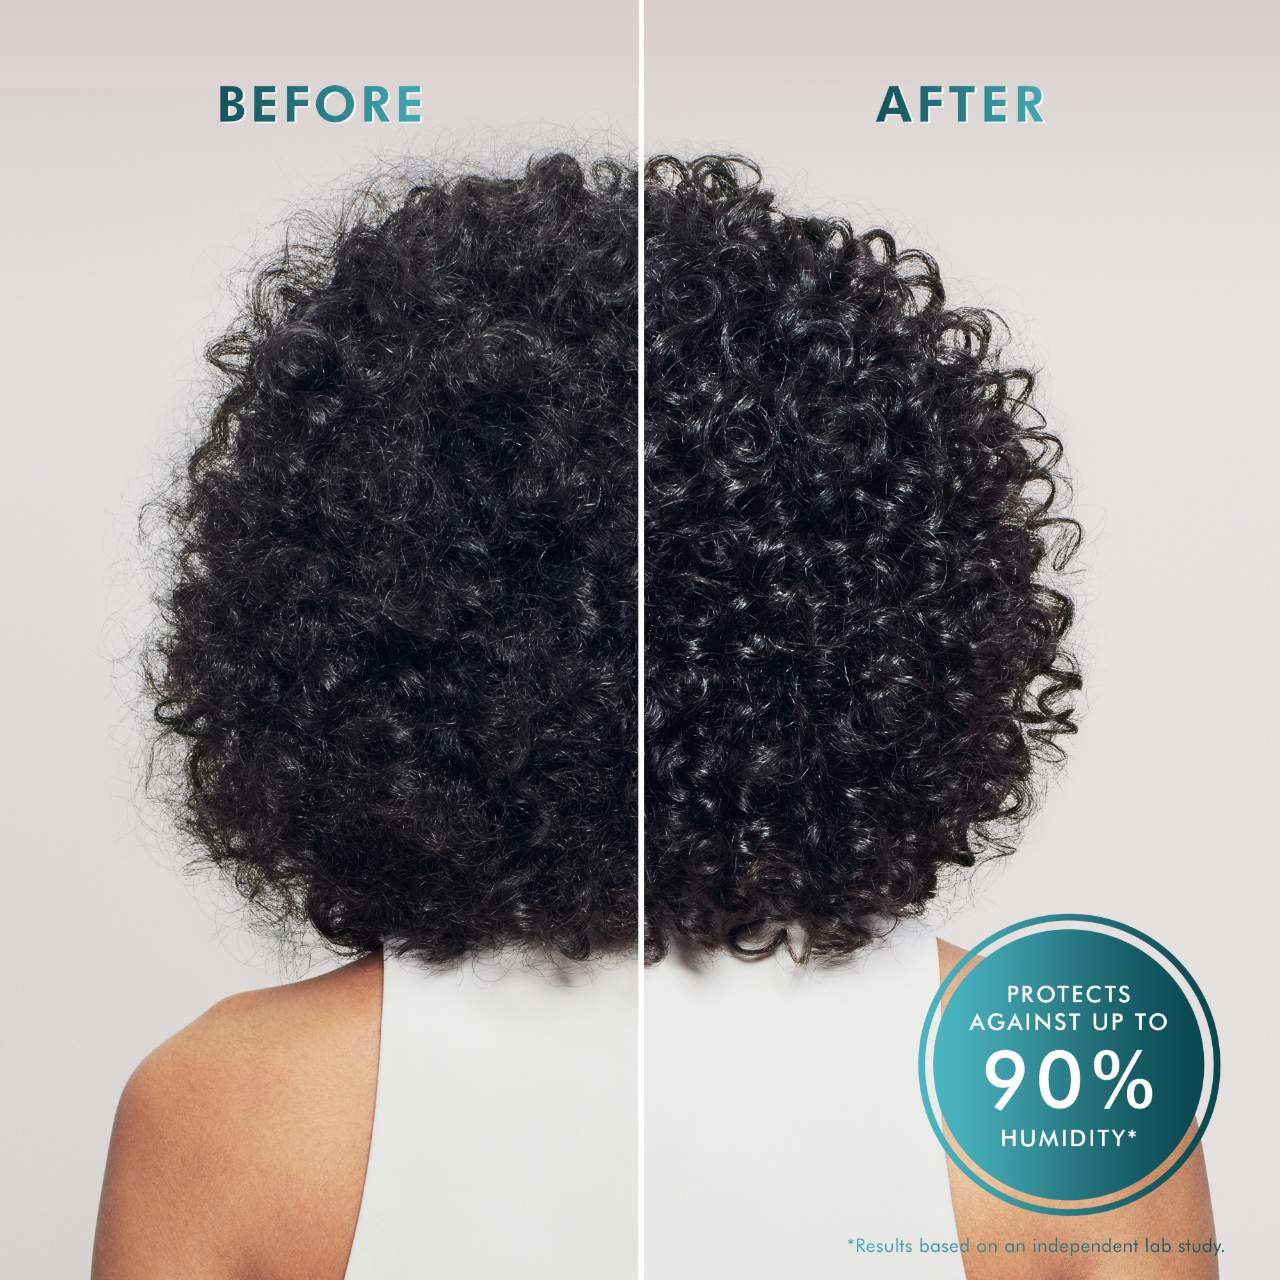 Moroccanoil Frizz Shield Spray Before After